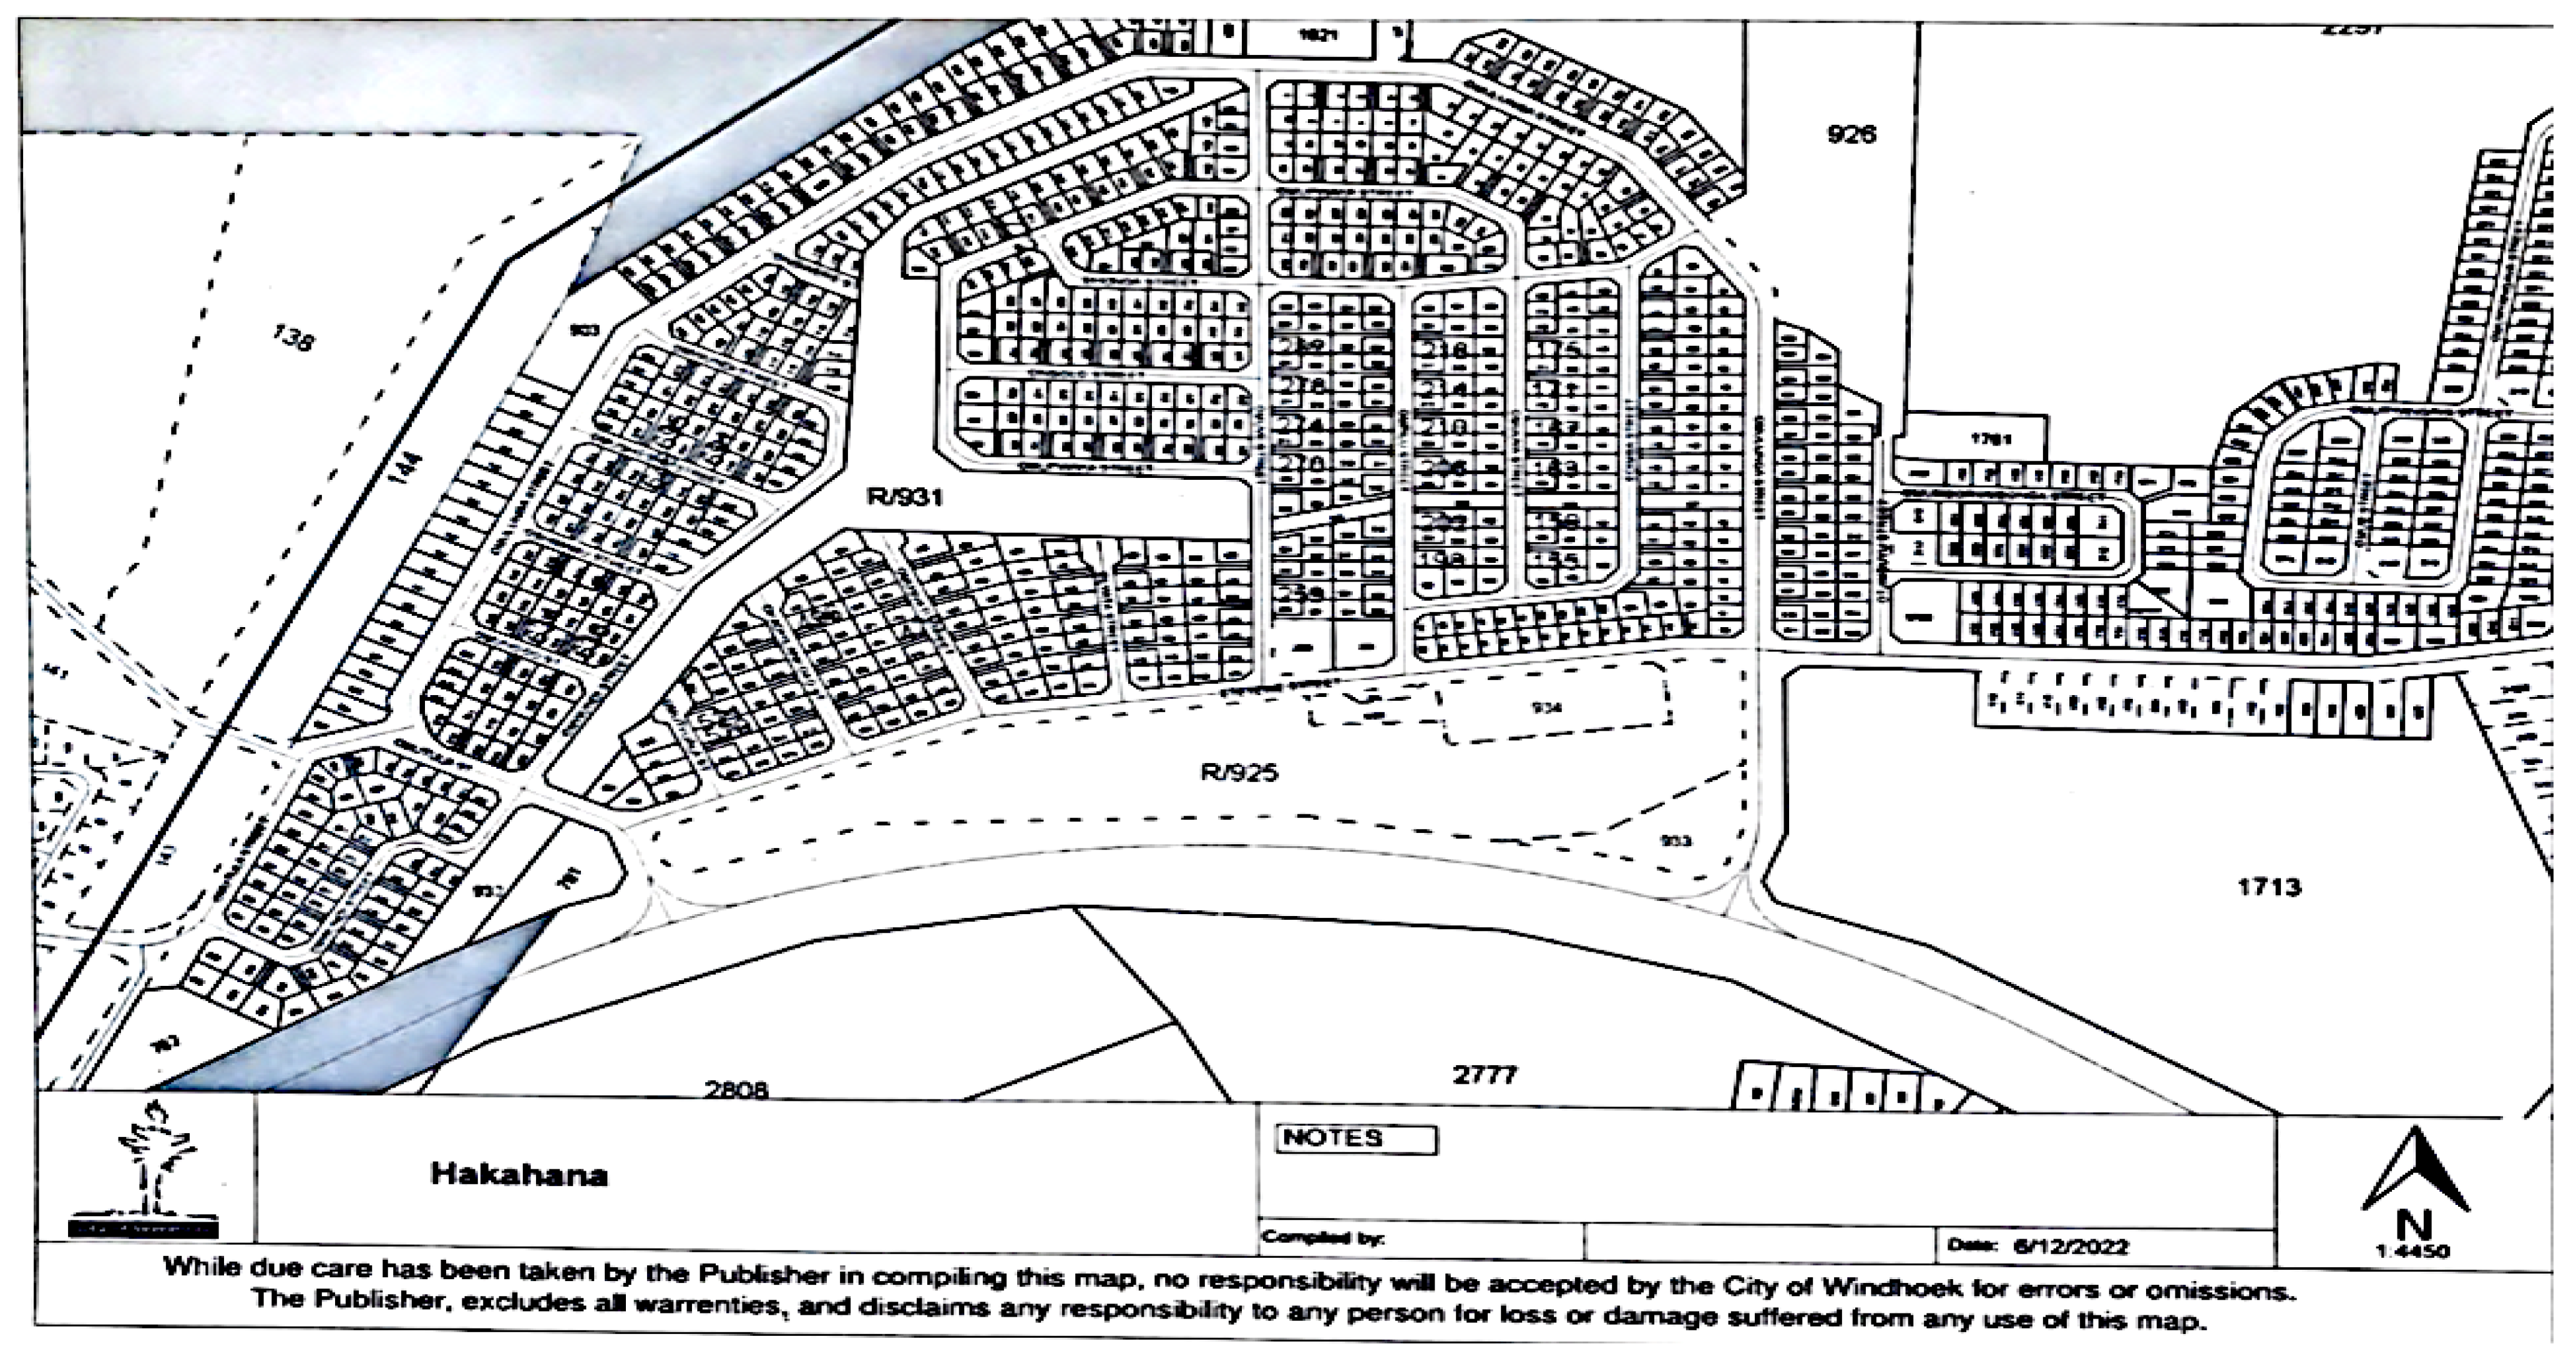 Plan of encampments in London. Plans of Encampments from 1778 to